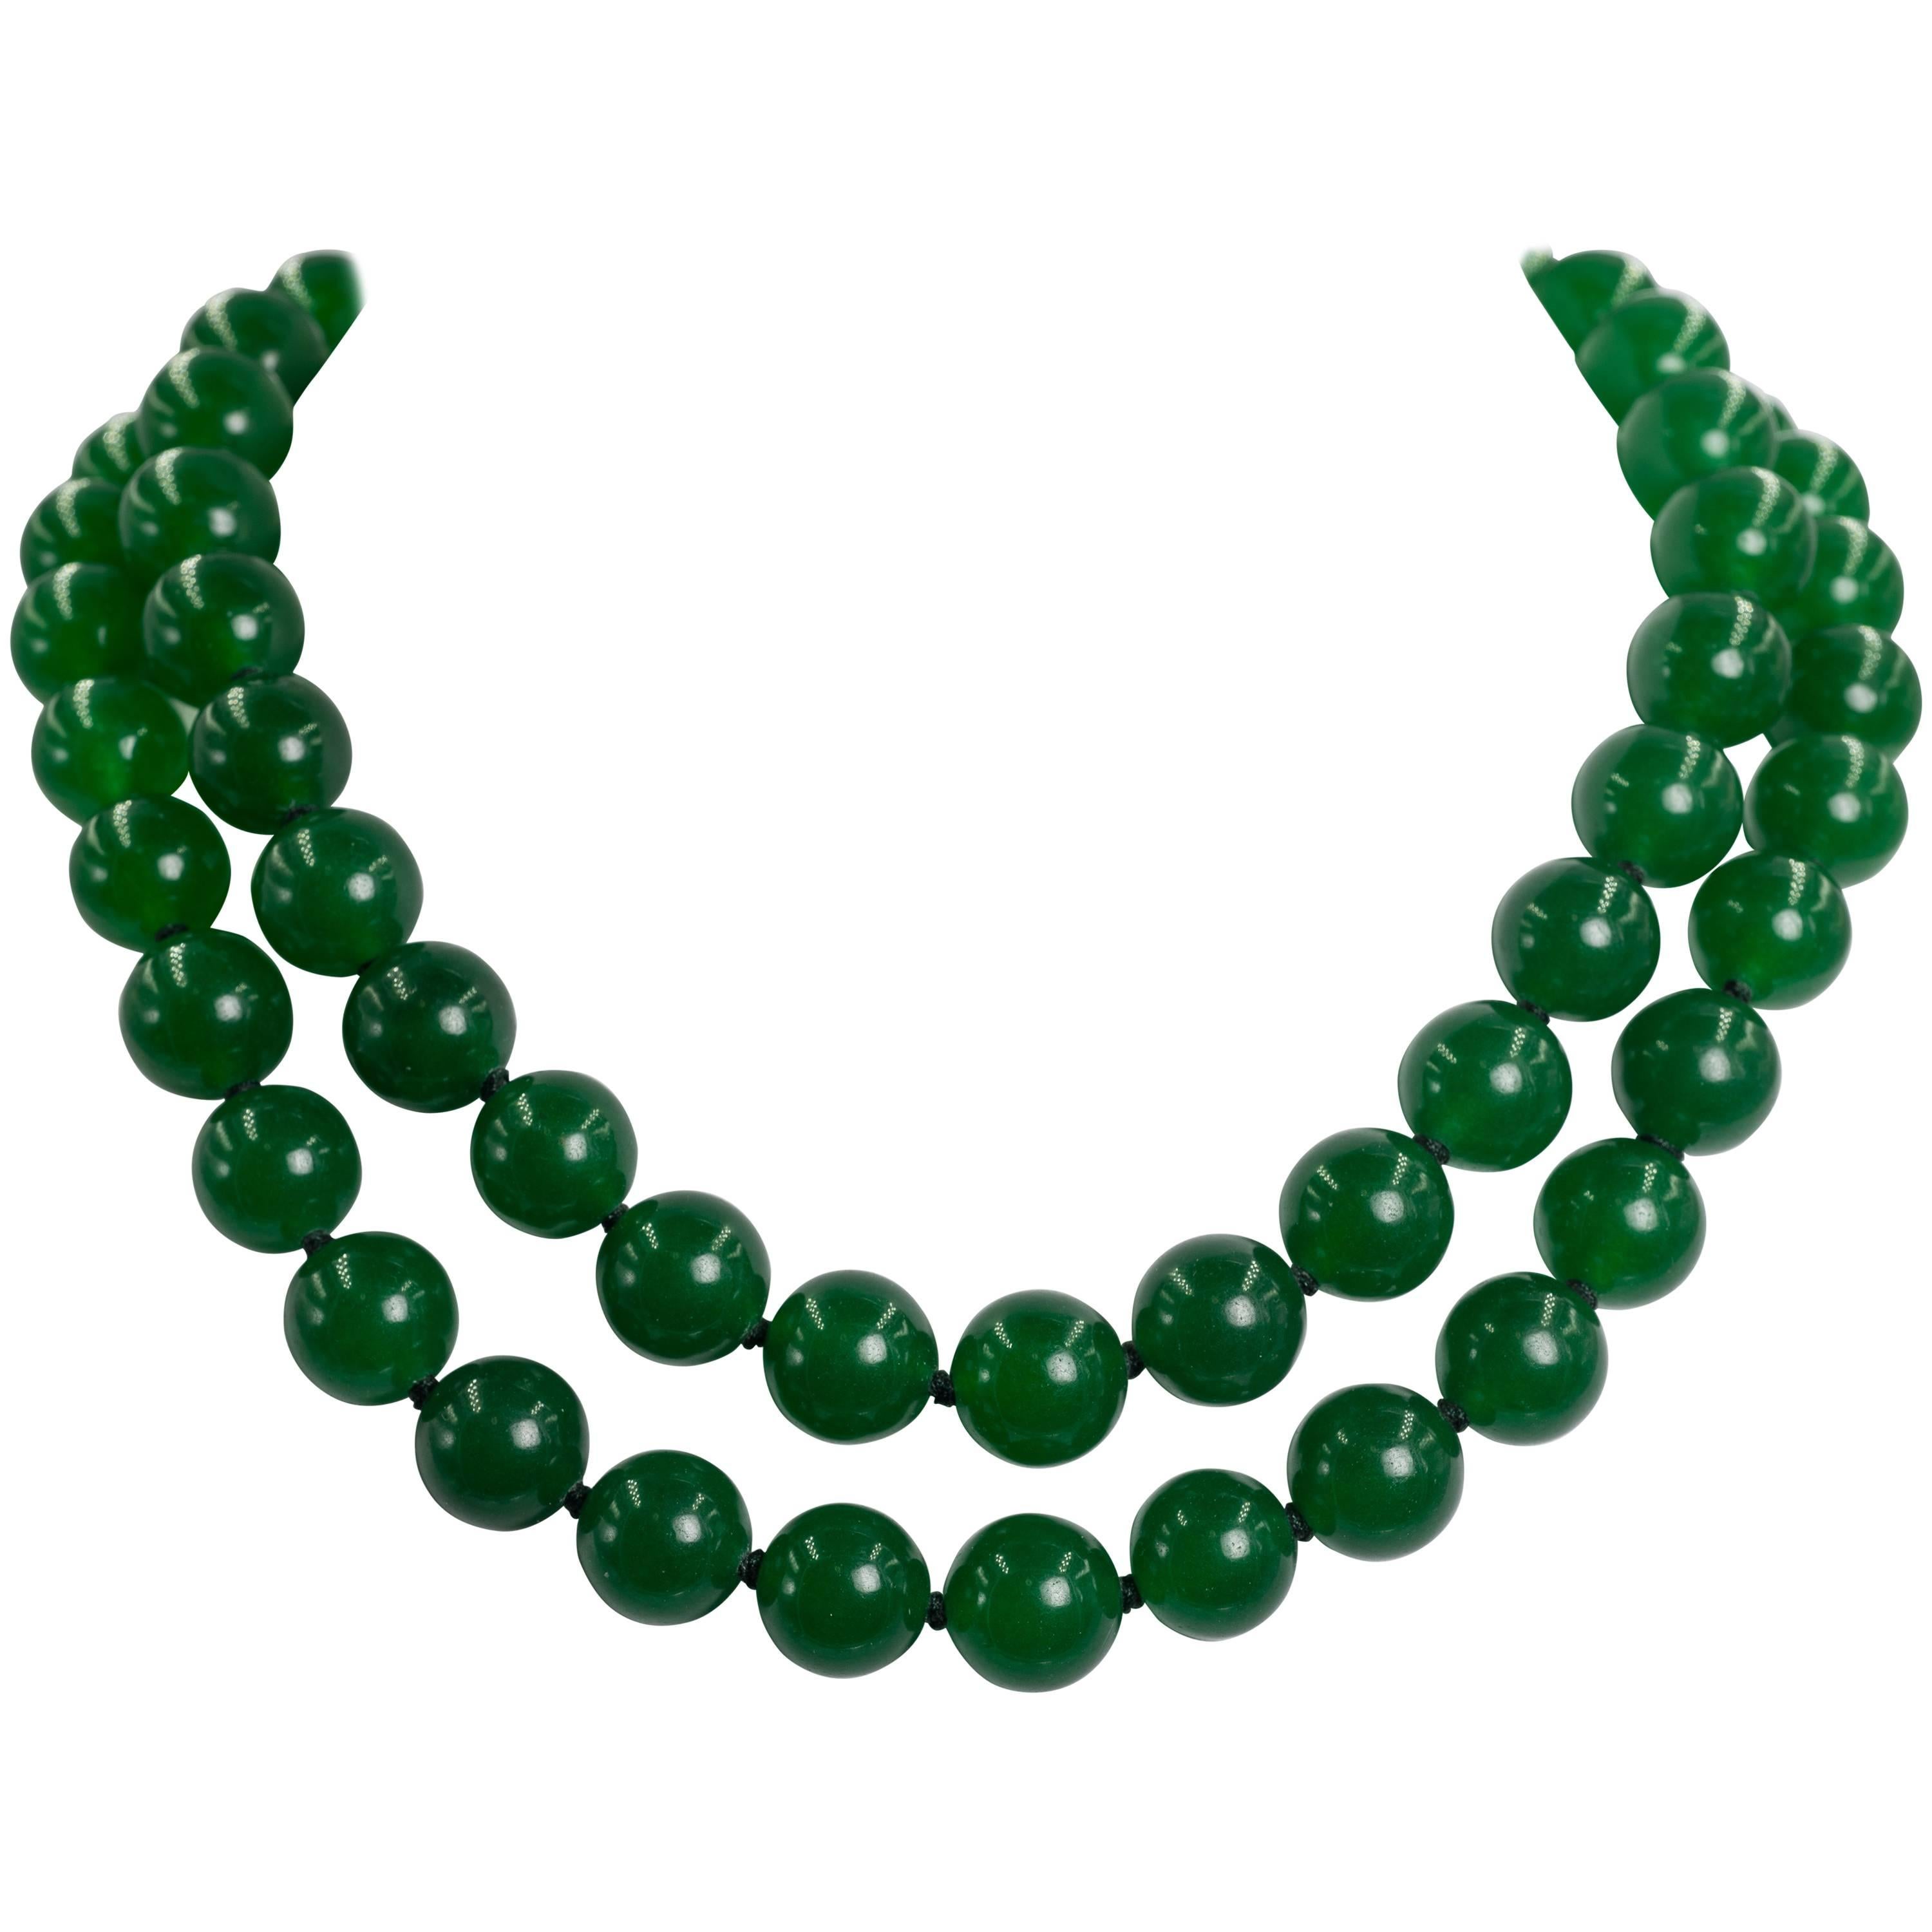 Elegant Two Strand Faux Imperial Jade Bead Necklace